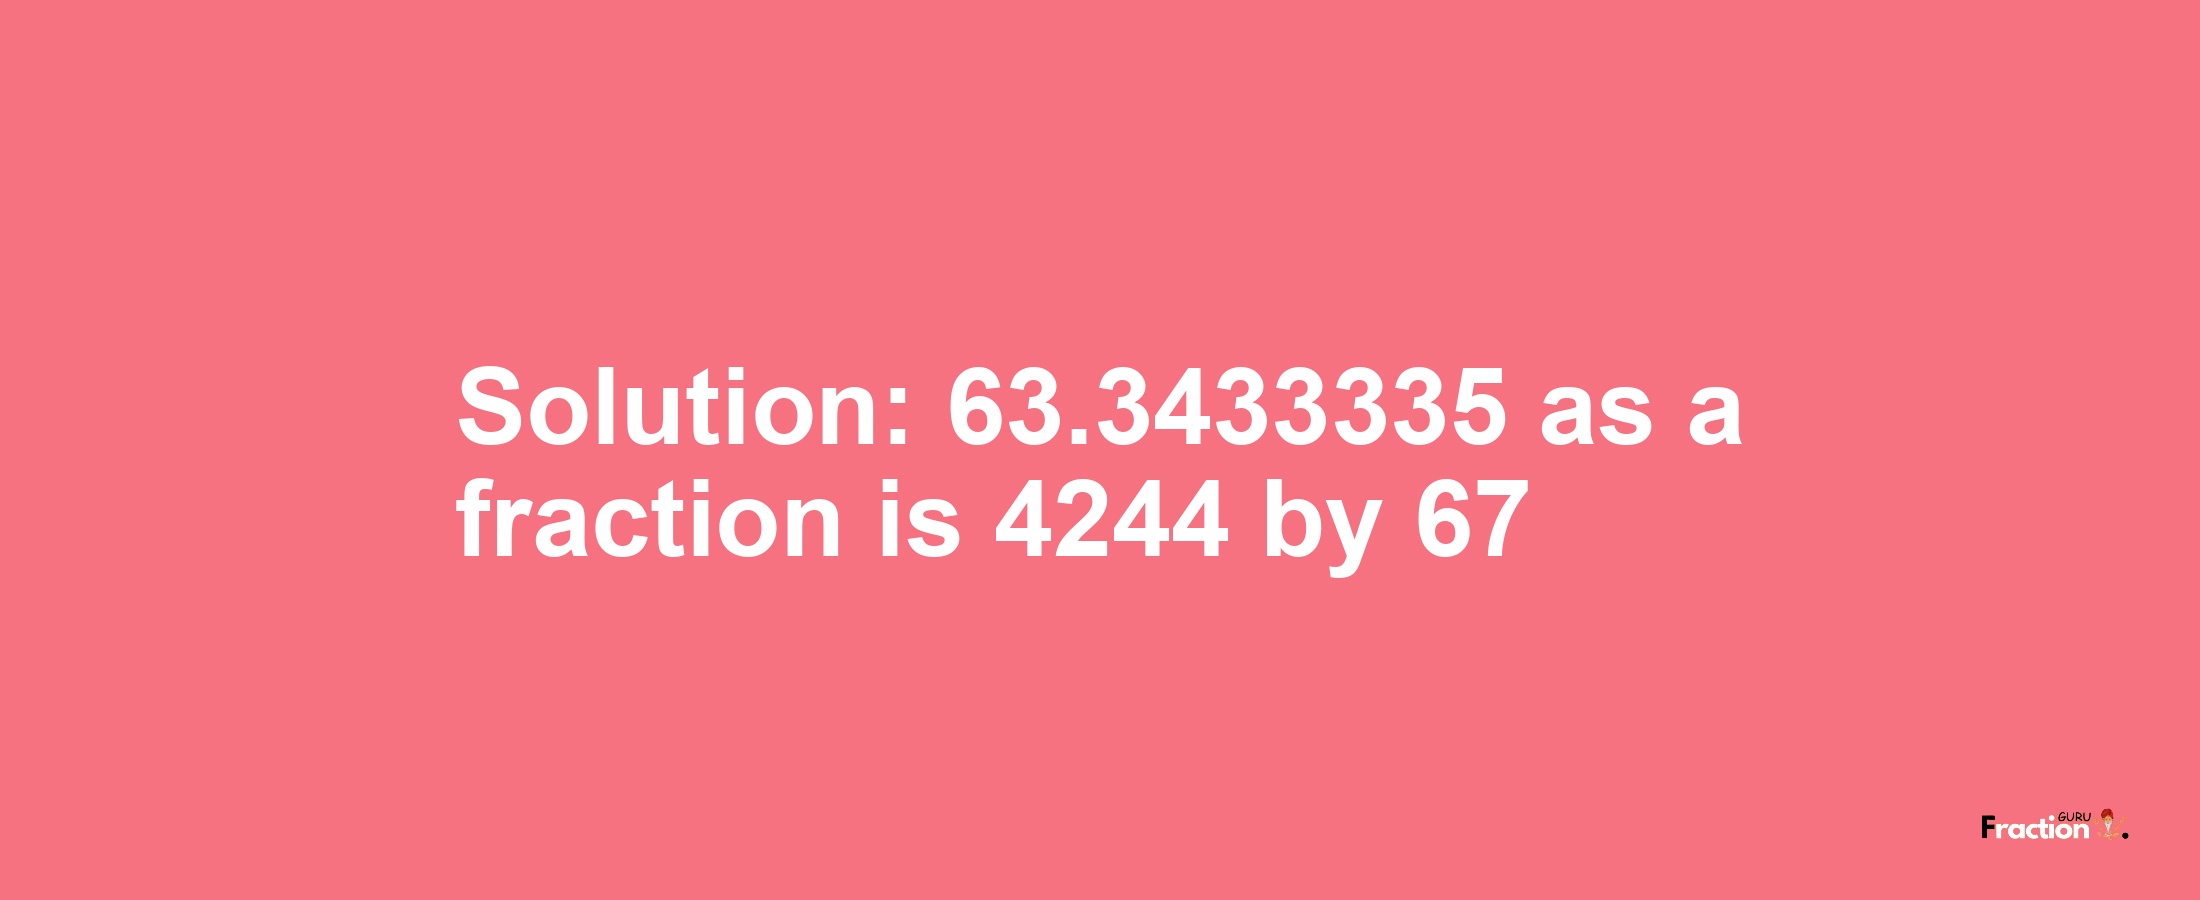 Solution:63.3433335 as a fraction is 4244/67